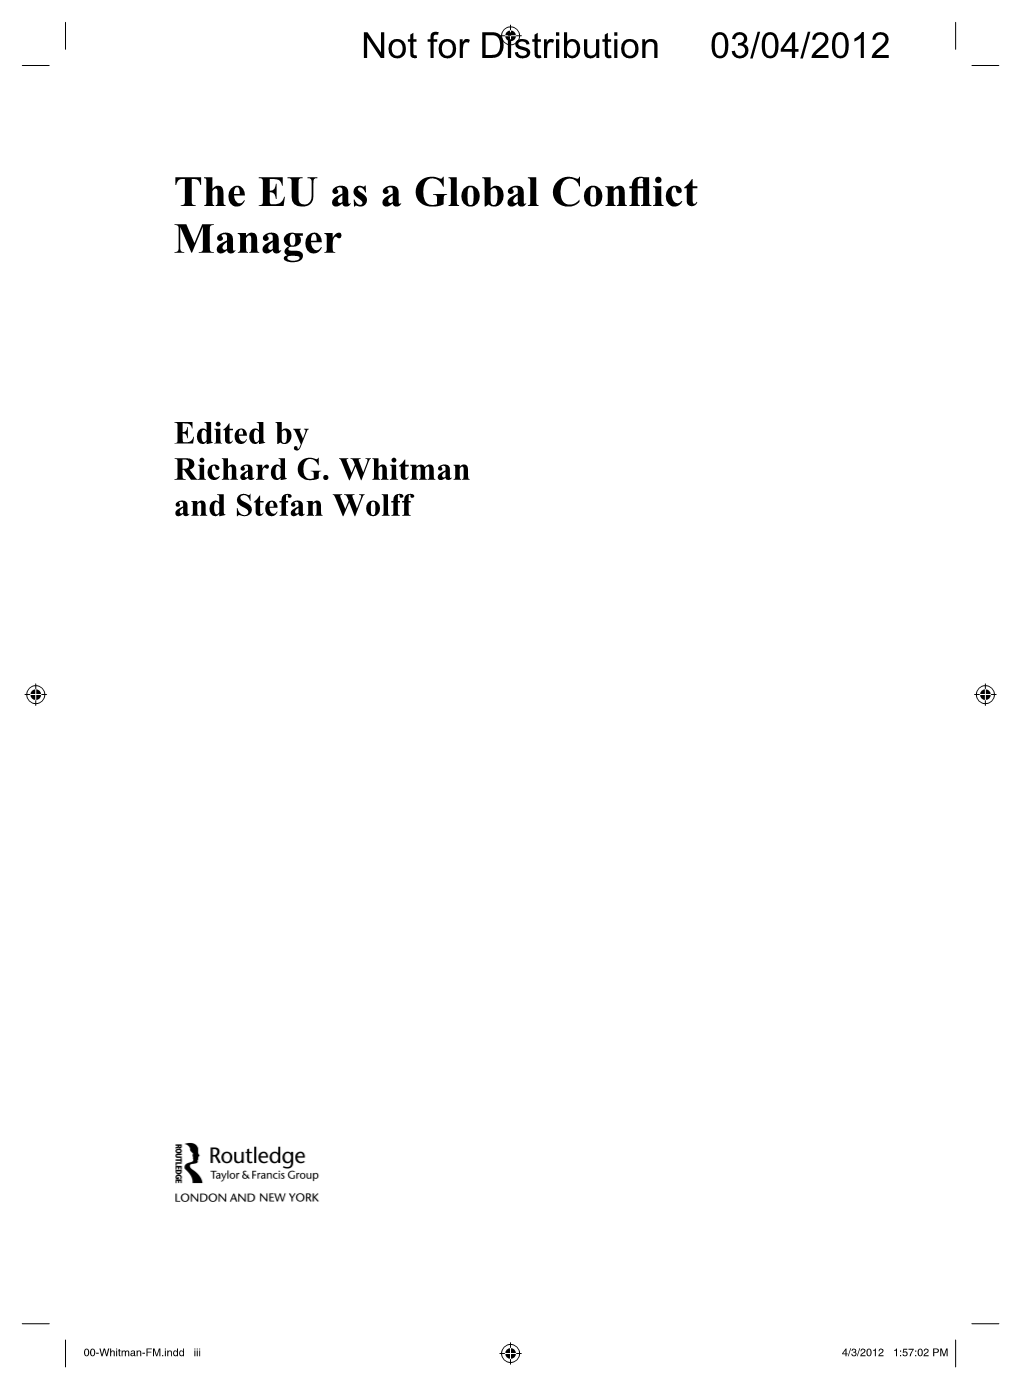 The EU As a Global Conflict Manager